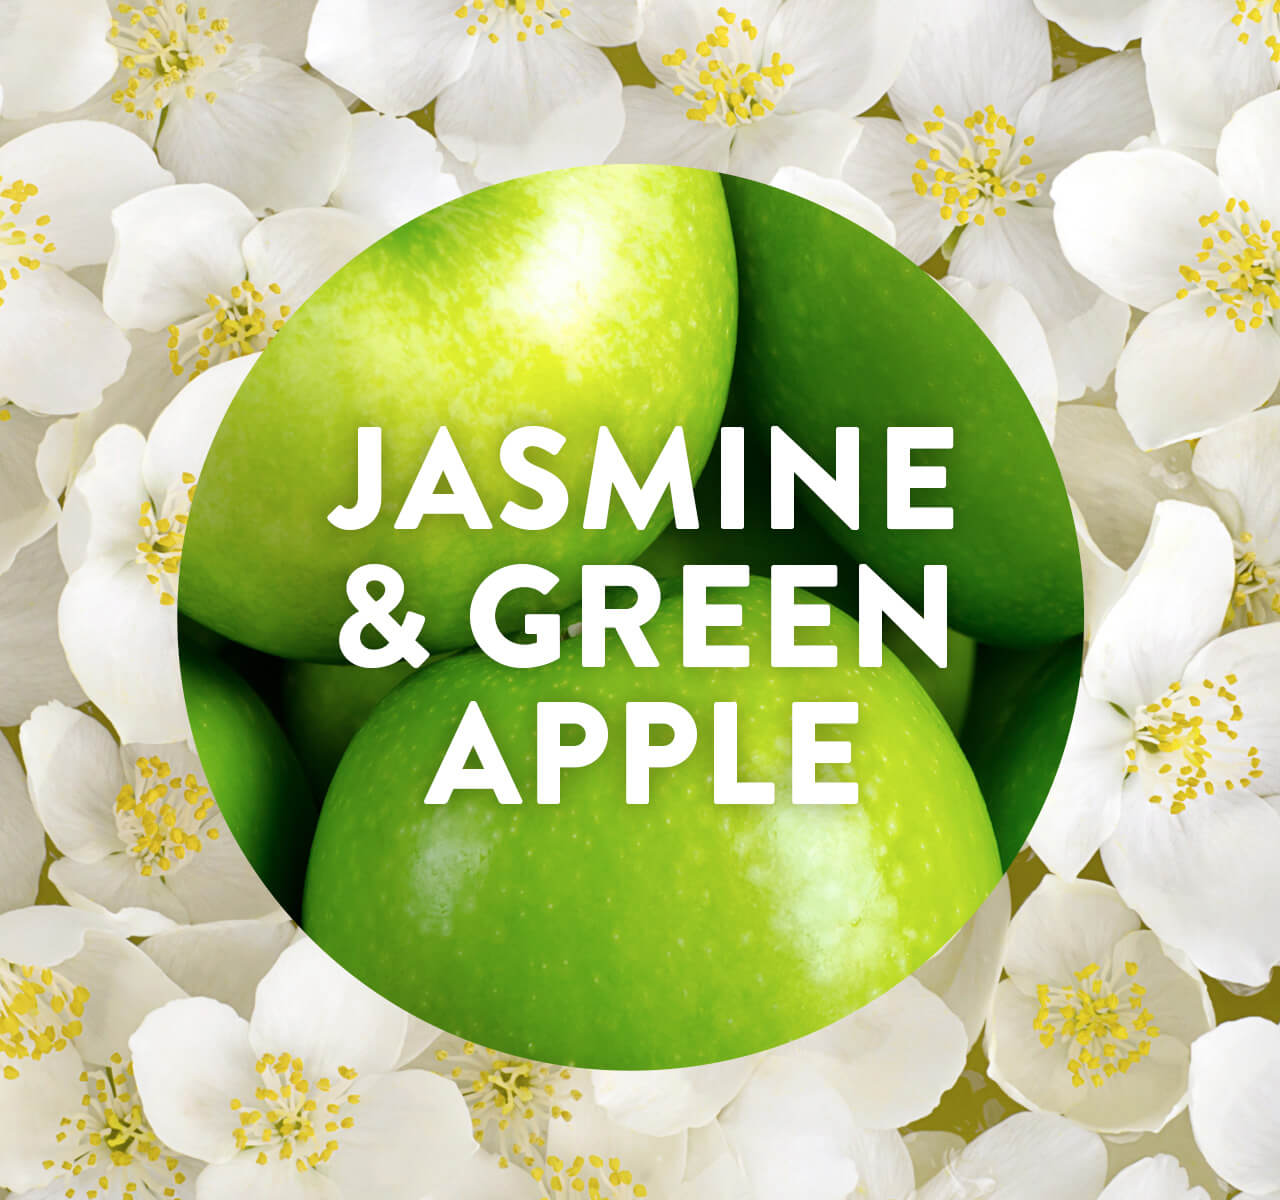 Air Wick & Stacey Solomon Morning Meadow Range with Jasmine & Green Apple Fragrance